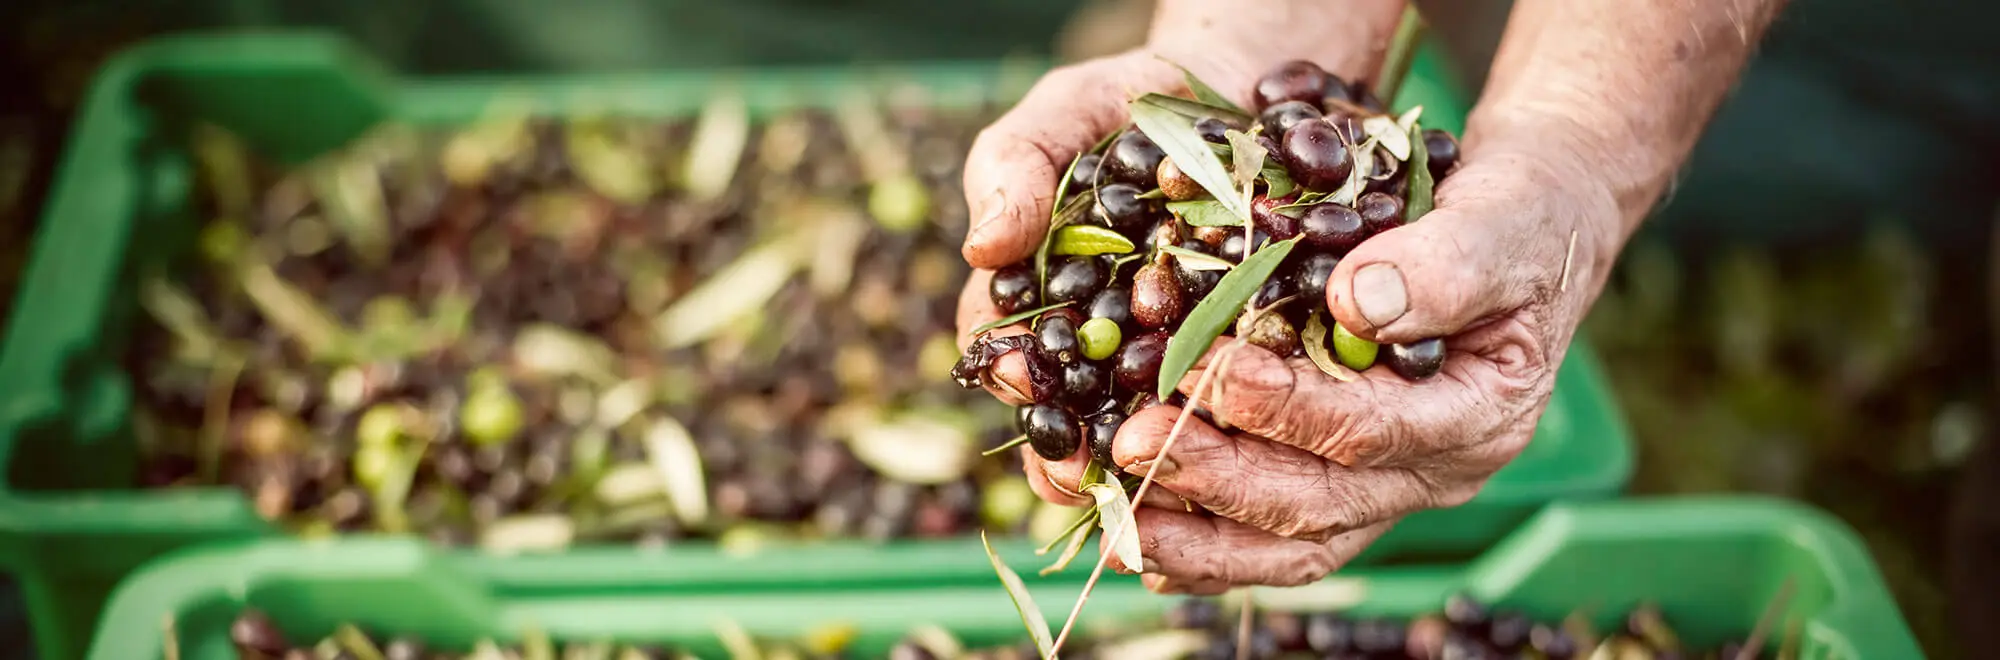 How is olive oil made in Spain?